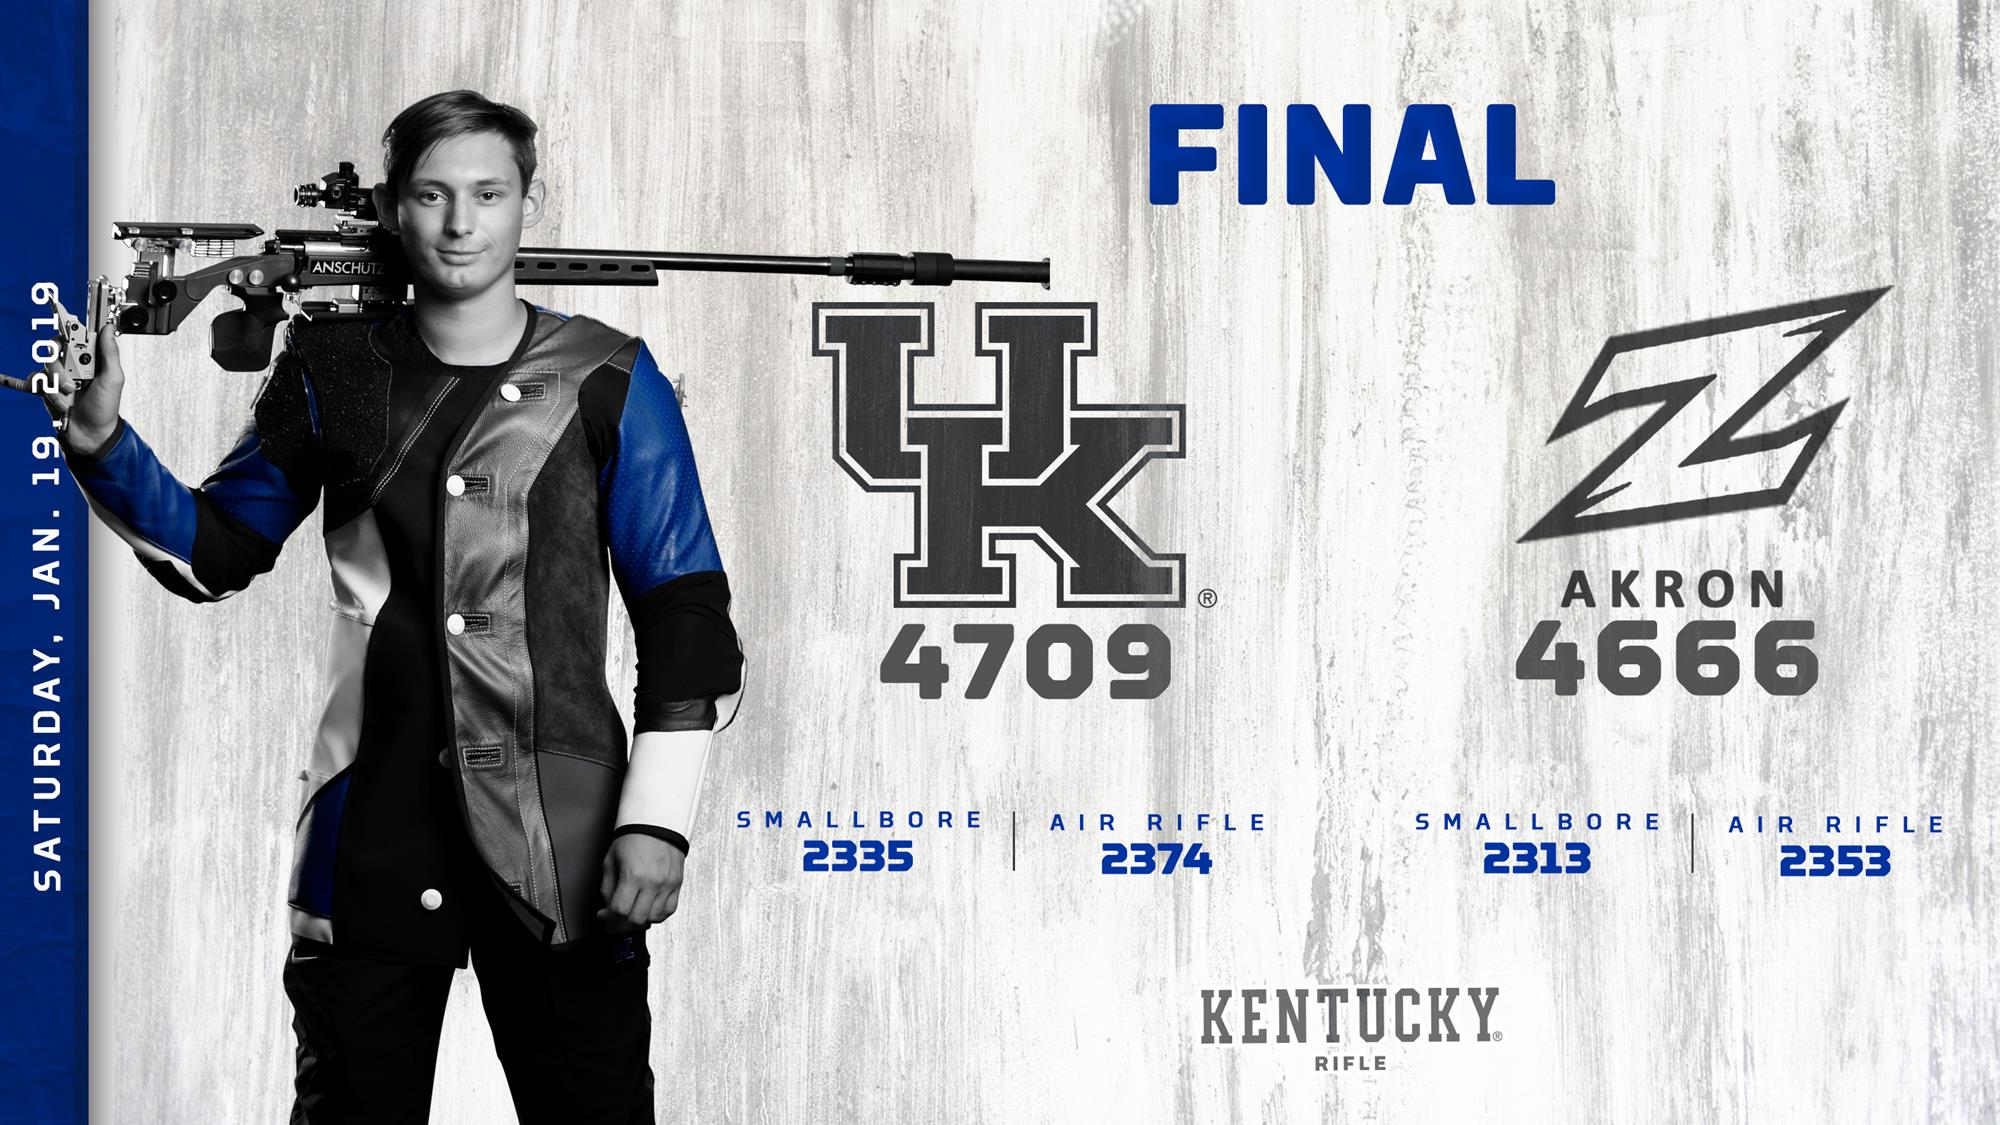 UK Rifle Begins 2019 with 4709 vs Akron